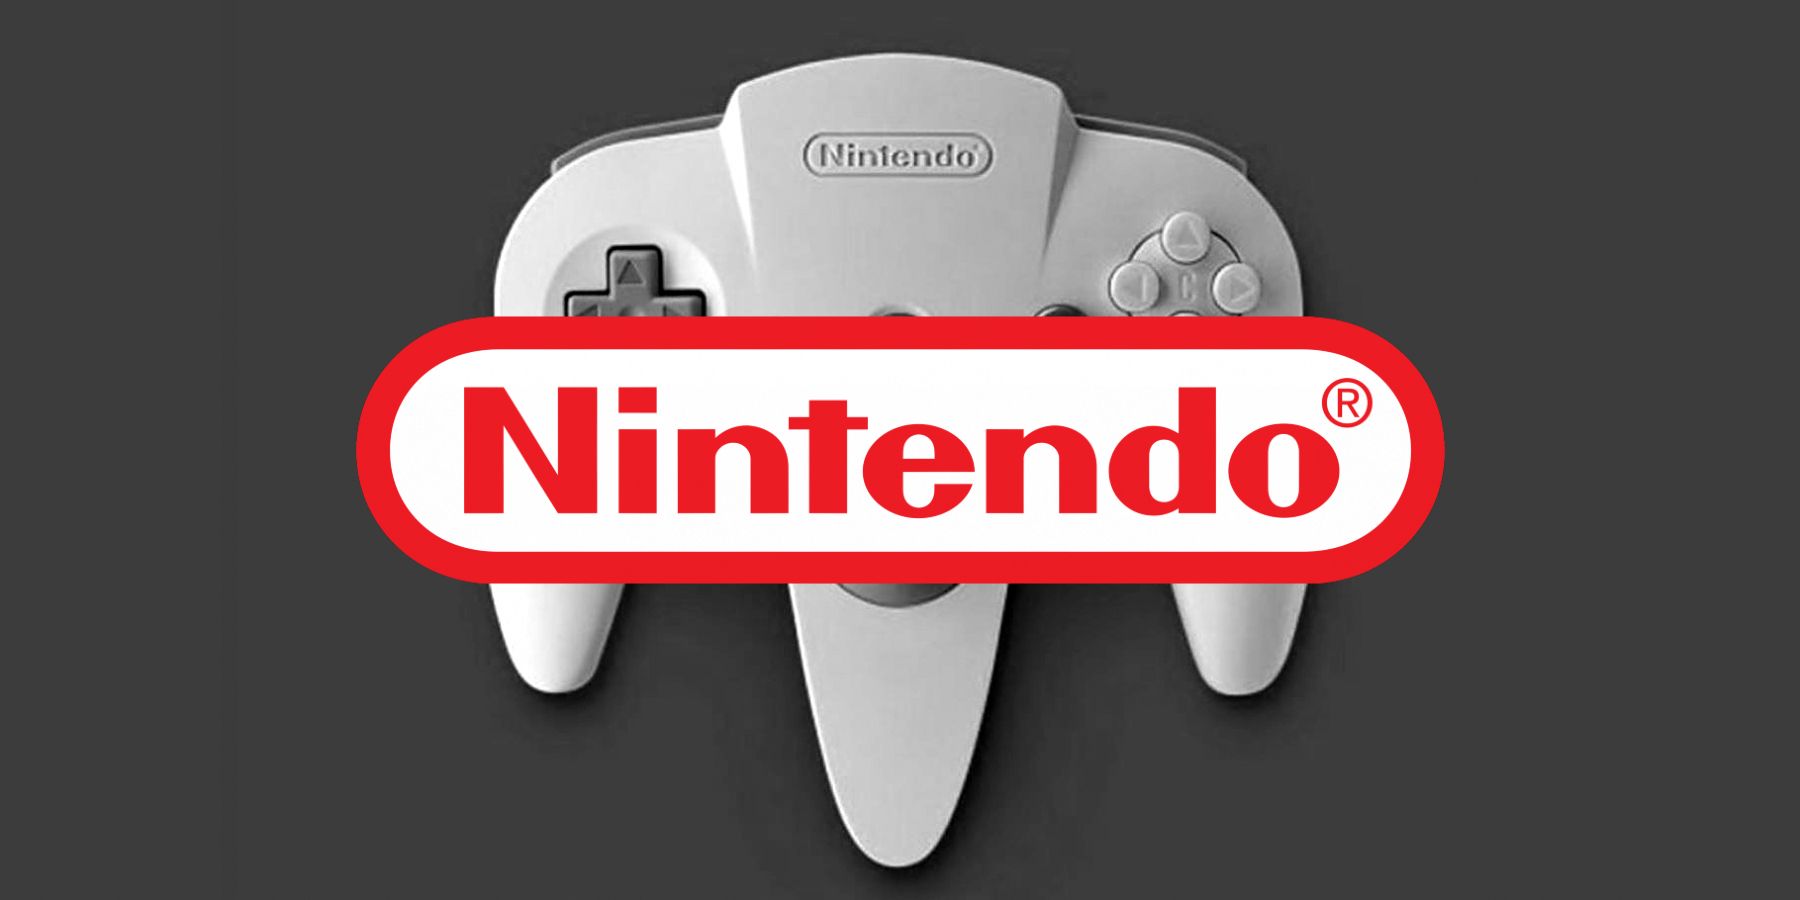 Nintendo is updating the Switch's Nintendo 64 emulator to try to